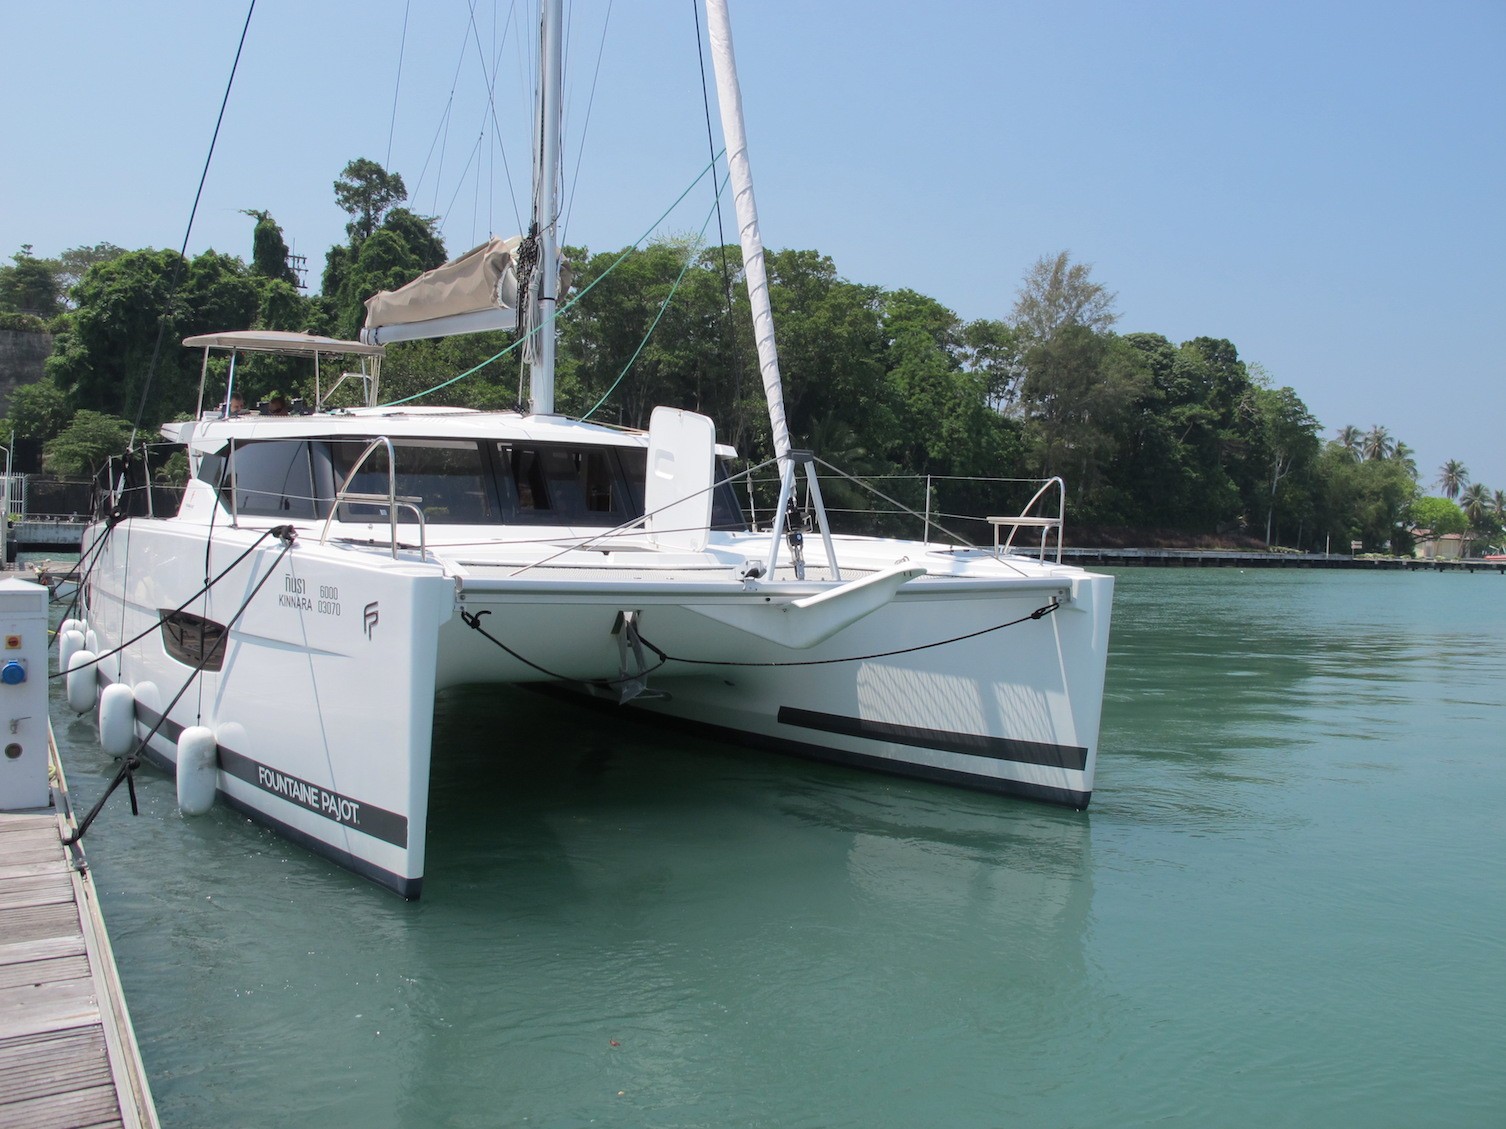 Lucia 40 - Yacht Charter Queensland & Boat hire in Australia Queensland Whitsundays Coral Sea Marina 1